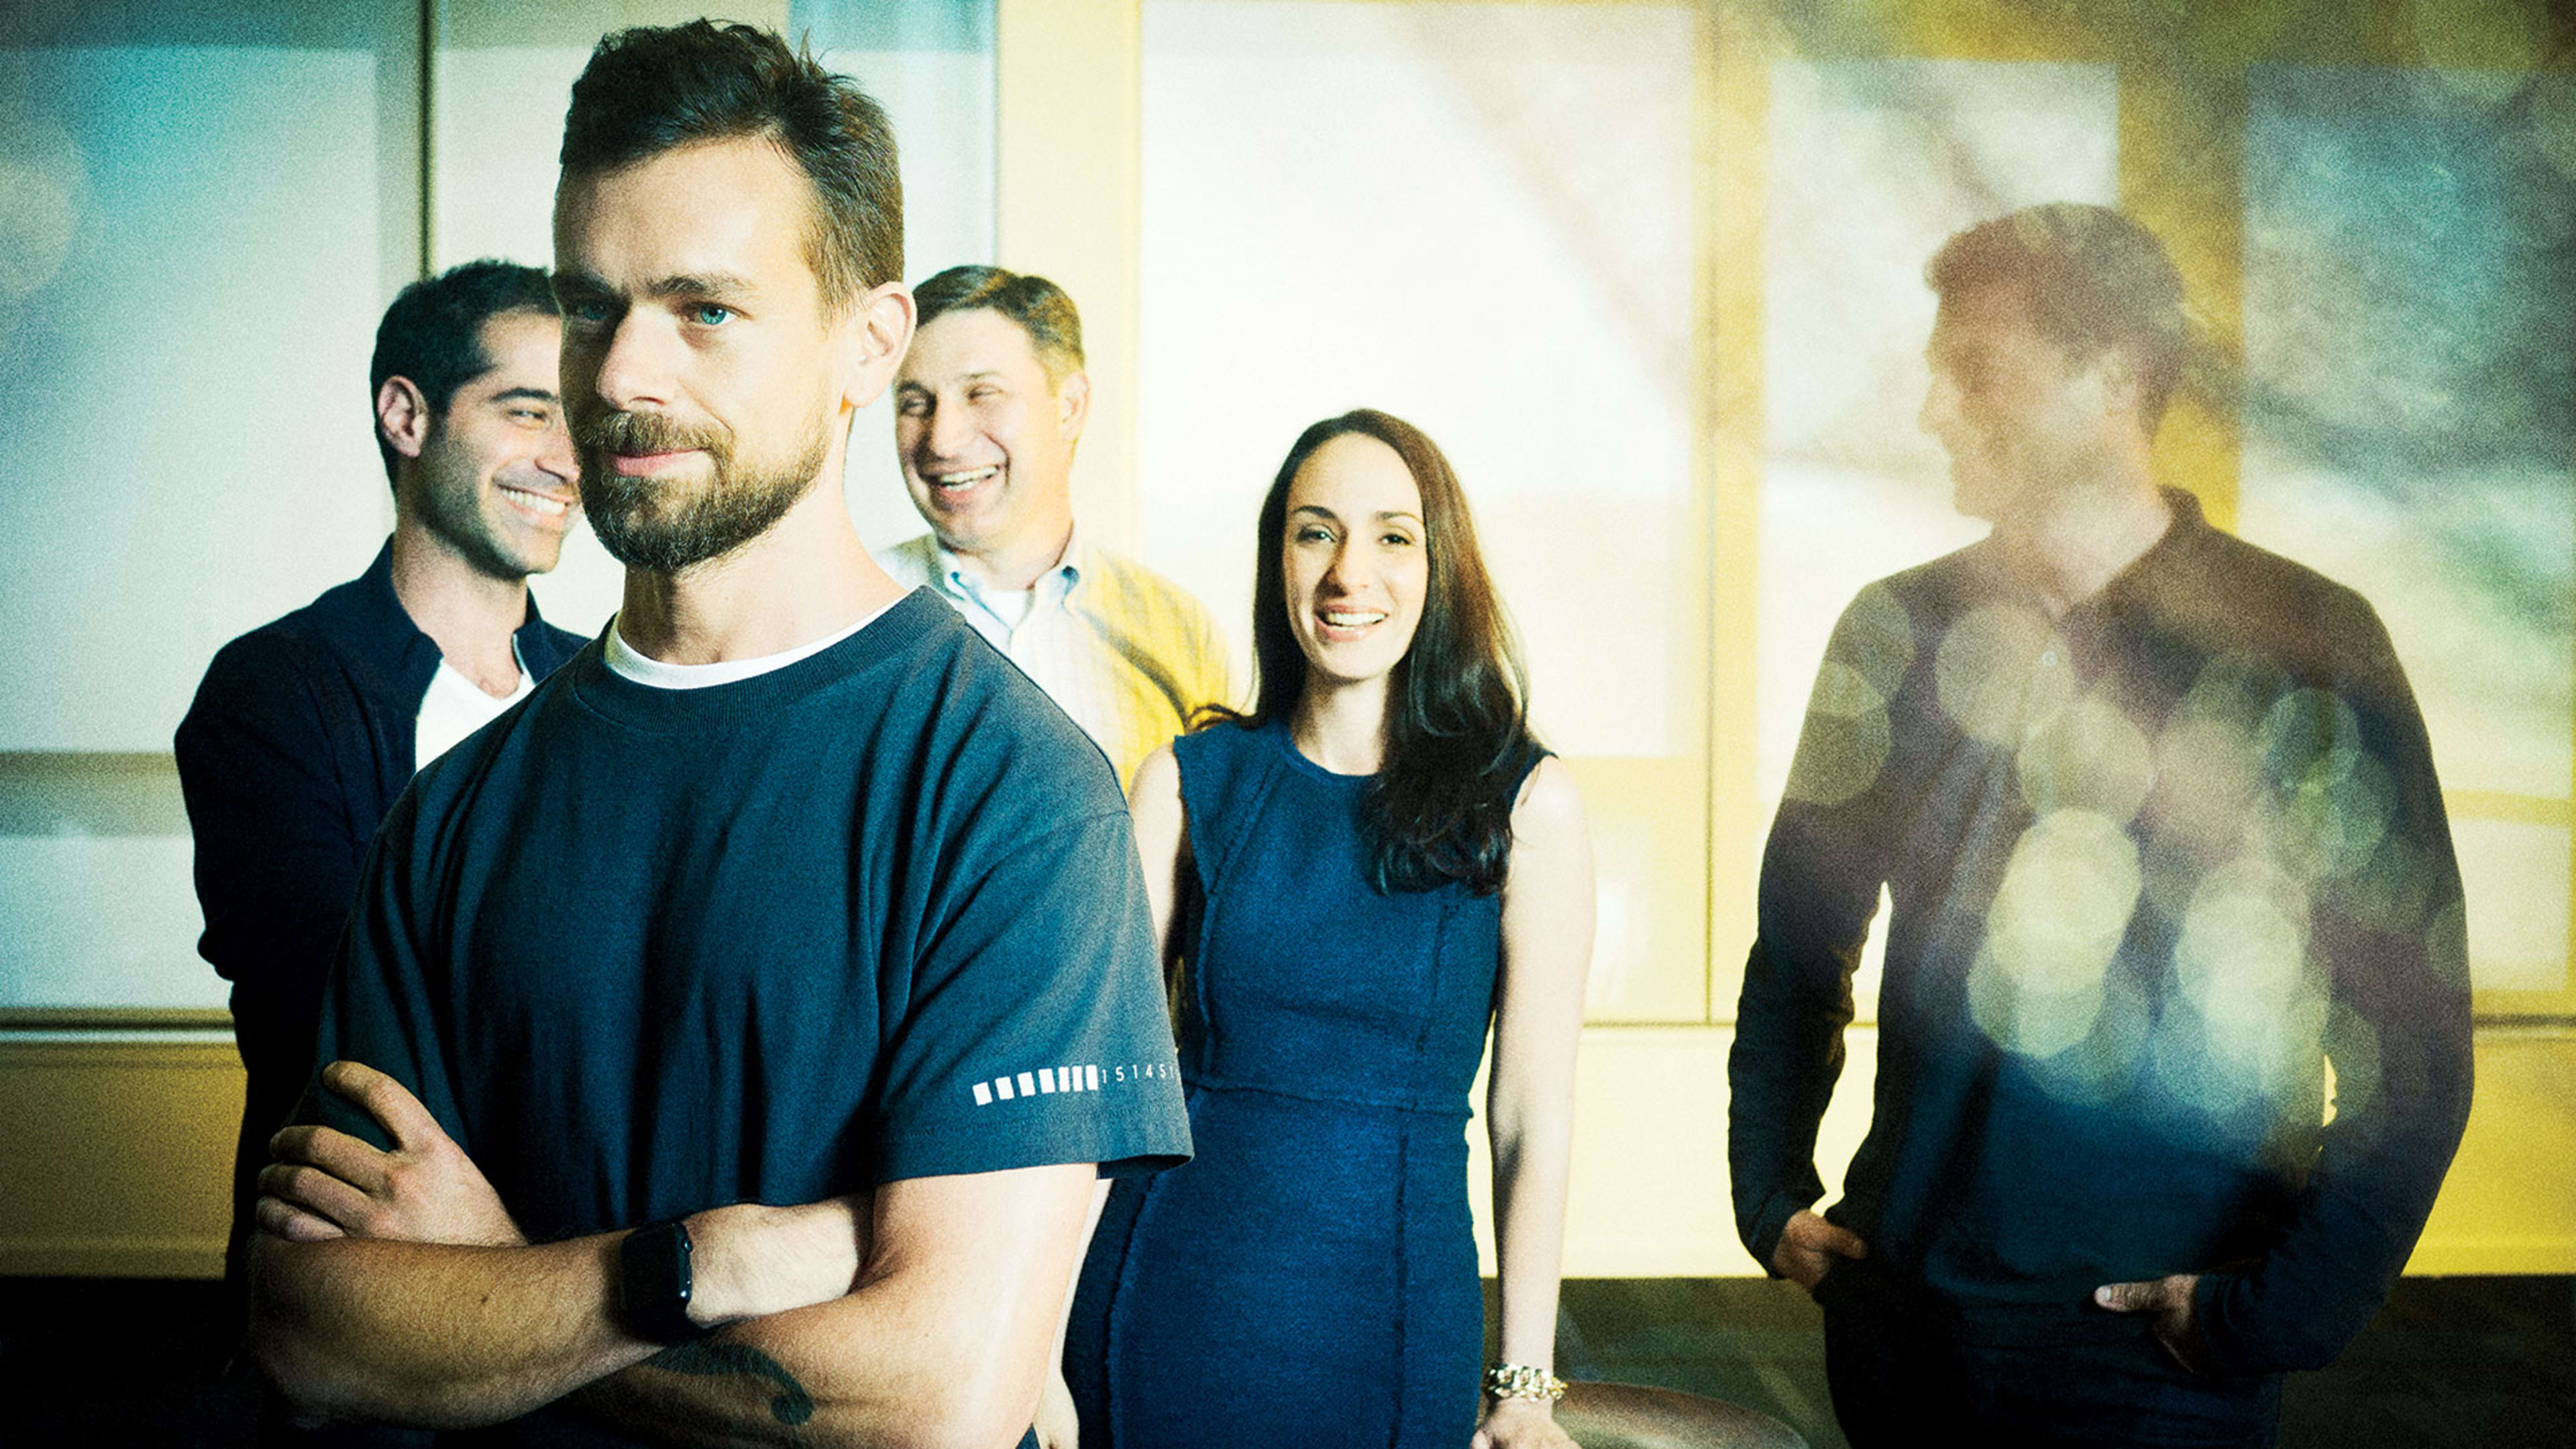 Game Time For Twitter: Jack Dorsey’s Big Bet On Live Events